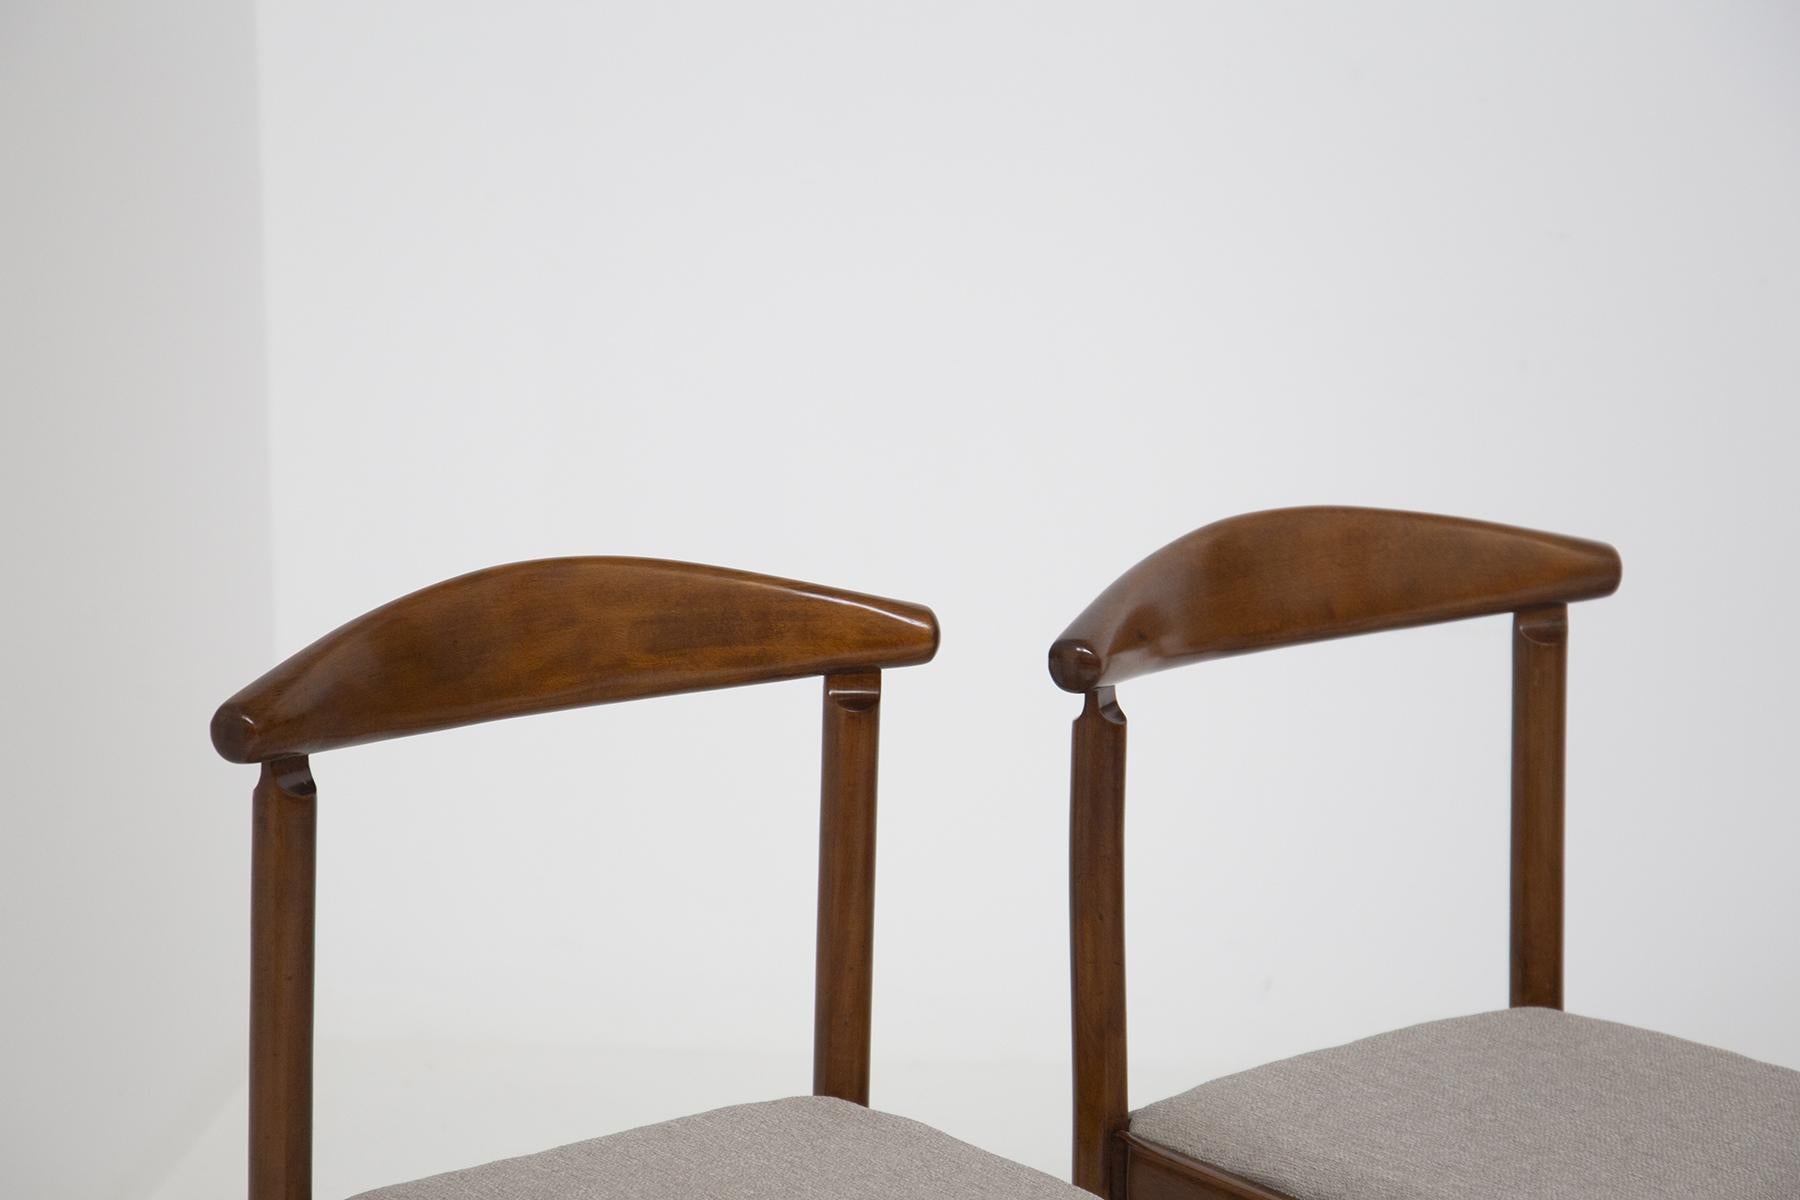 Set of 4 Italian dining chairs from the 1960s.
Each chair is made of walnut wood, while its seat has been reupholstered in beige cotton. The chairs have a simple and linear structure suitable for any type of living room or dining room.
Its